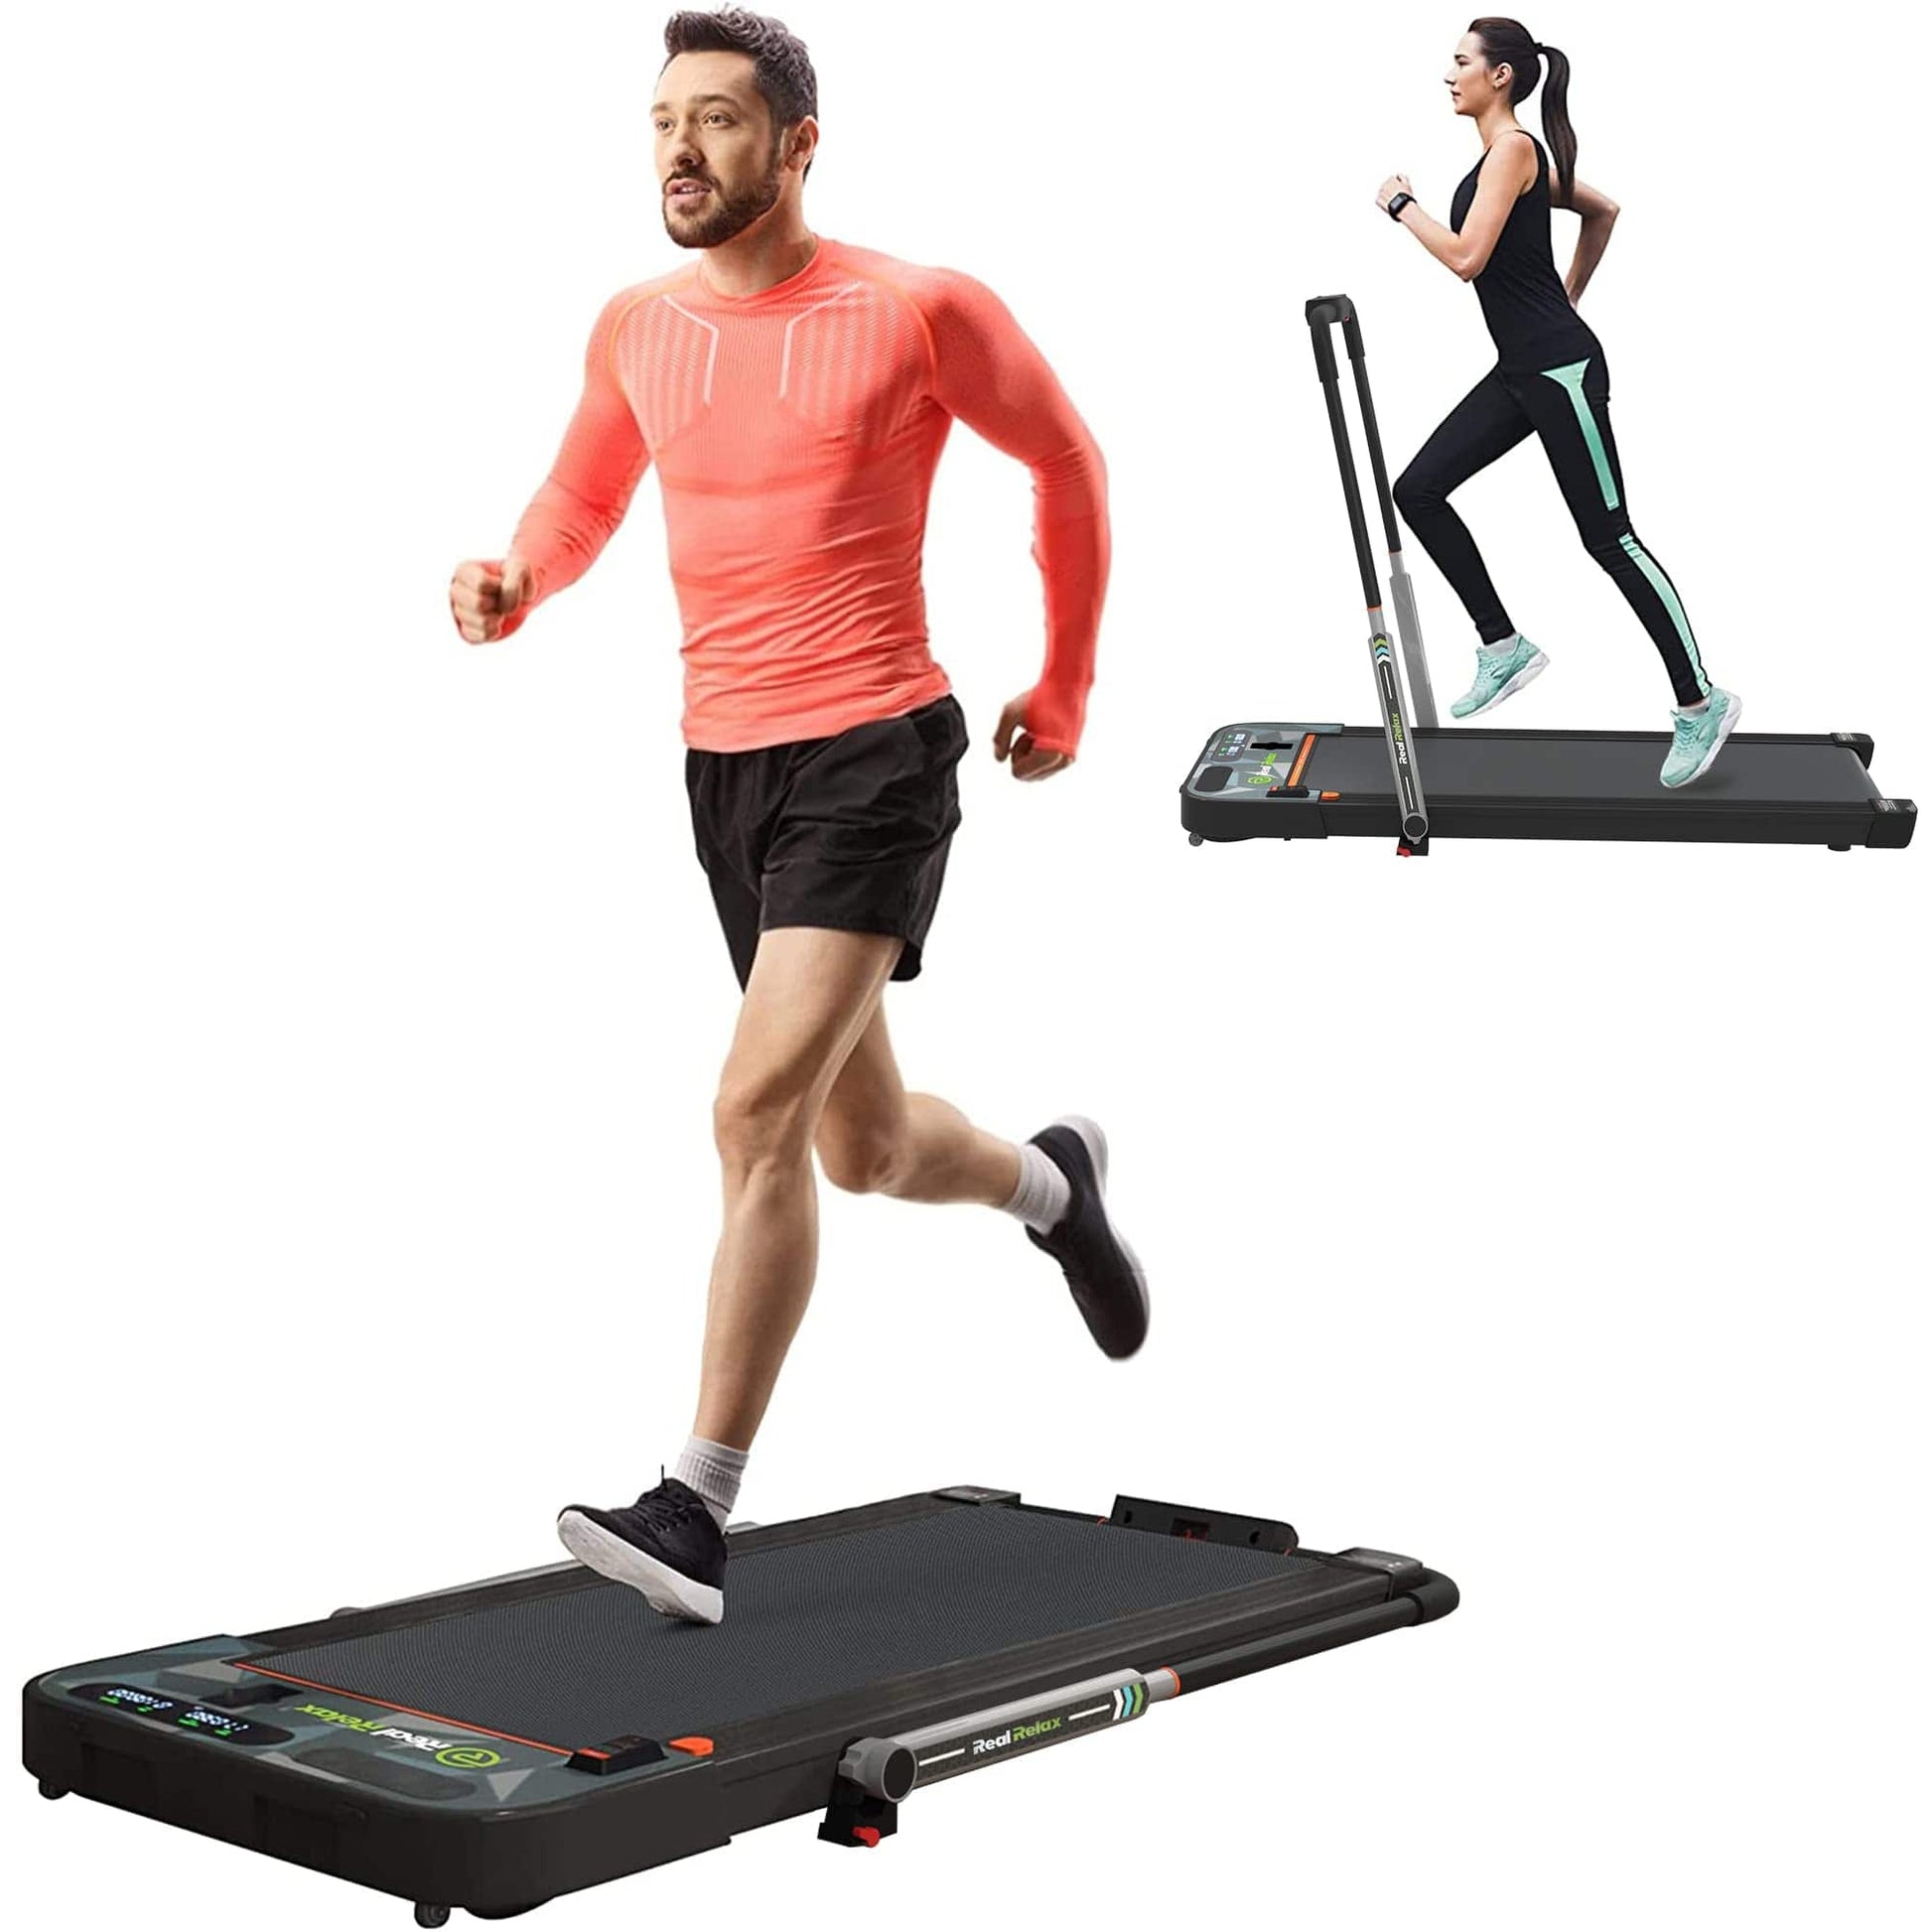 Real Relax Sports&Fitness Real Relax 2 in 1 Under Desk Treadmill, 2.5HP Electric Folding Treadmill with Bluetooth Speaker and Remote Control for Home & Office Use